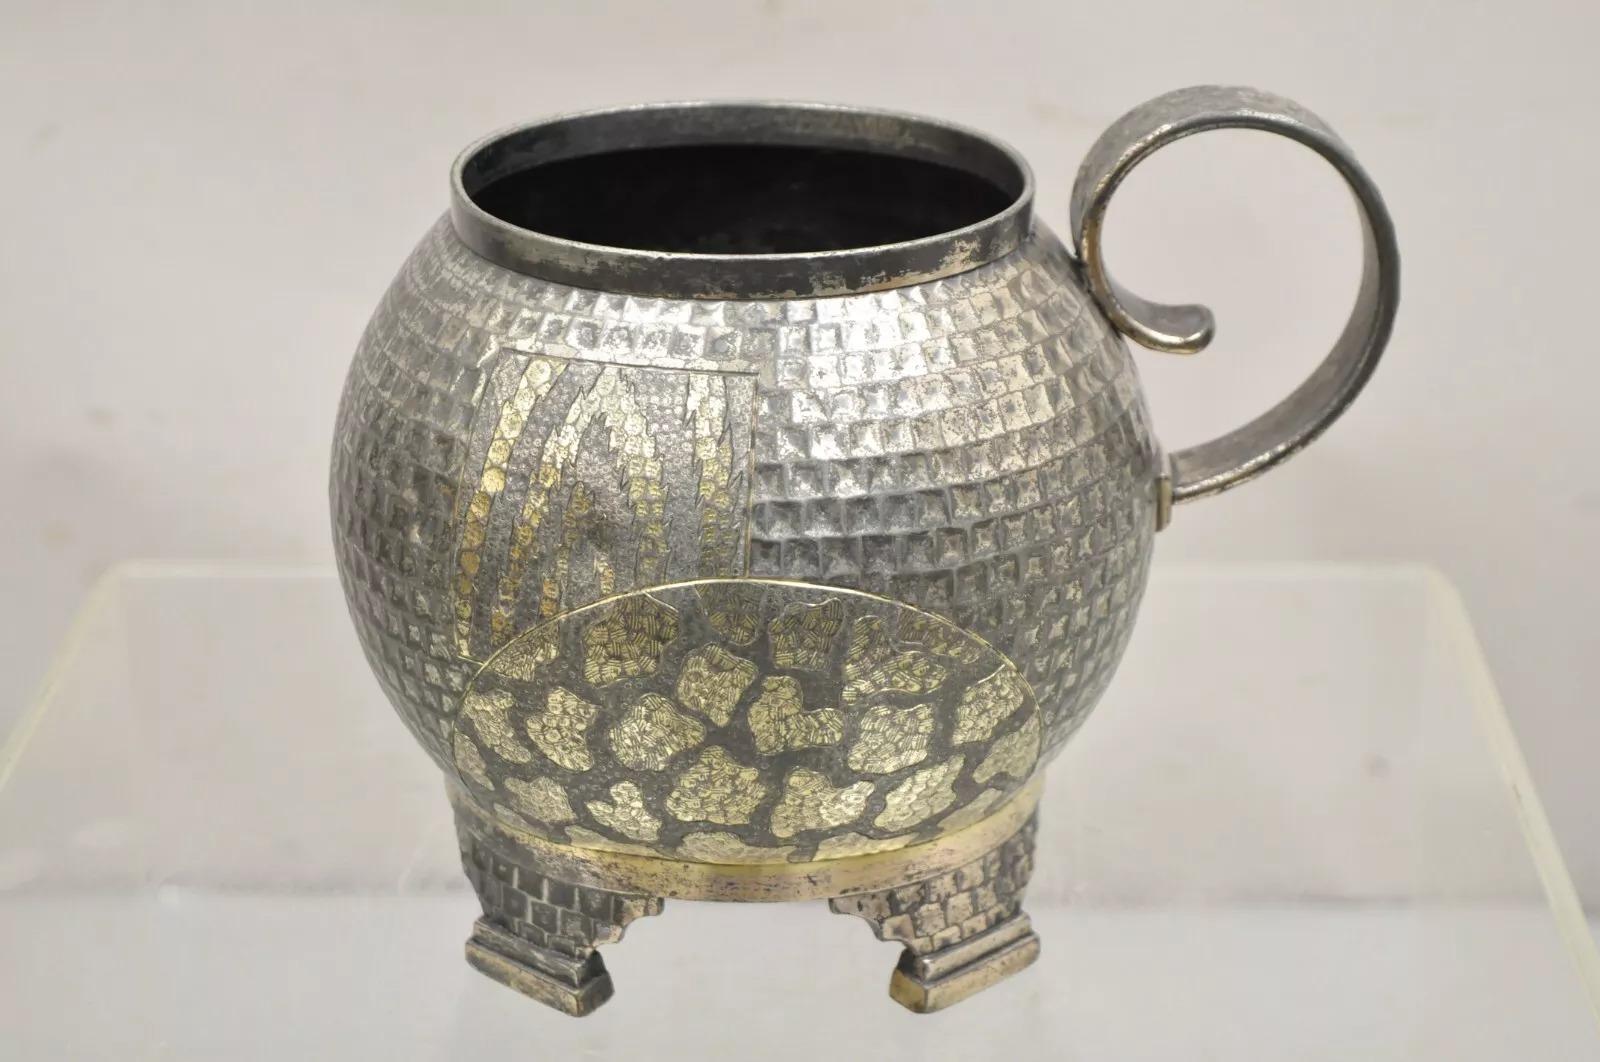 Antique Derby Silver Co Victorian Hammered Decorated Silver Plated Footed Round Jug Pitcher with Handle. Circa Early 20th Century. Measurements: 7.5